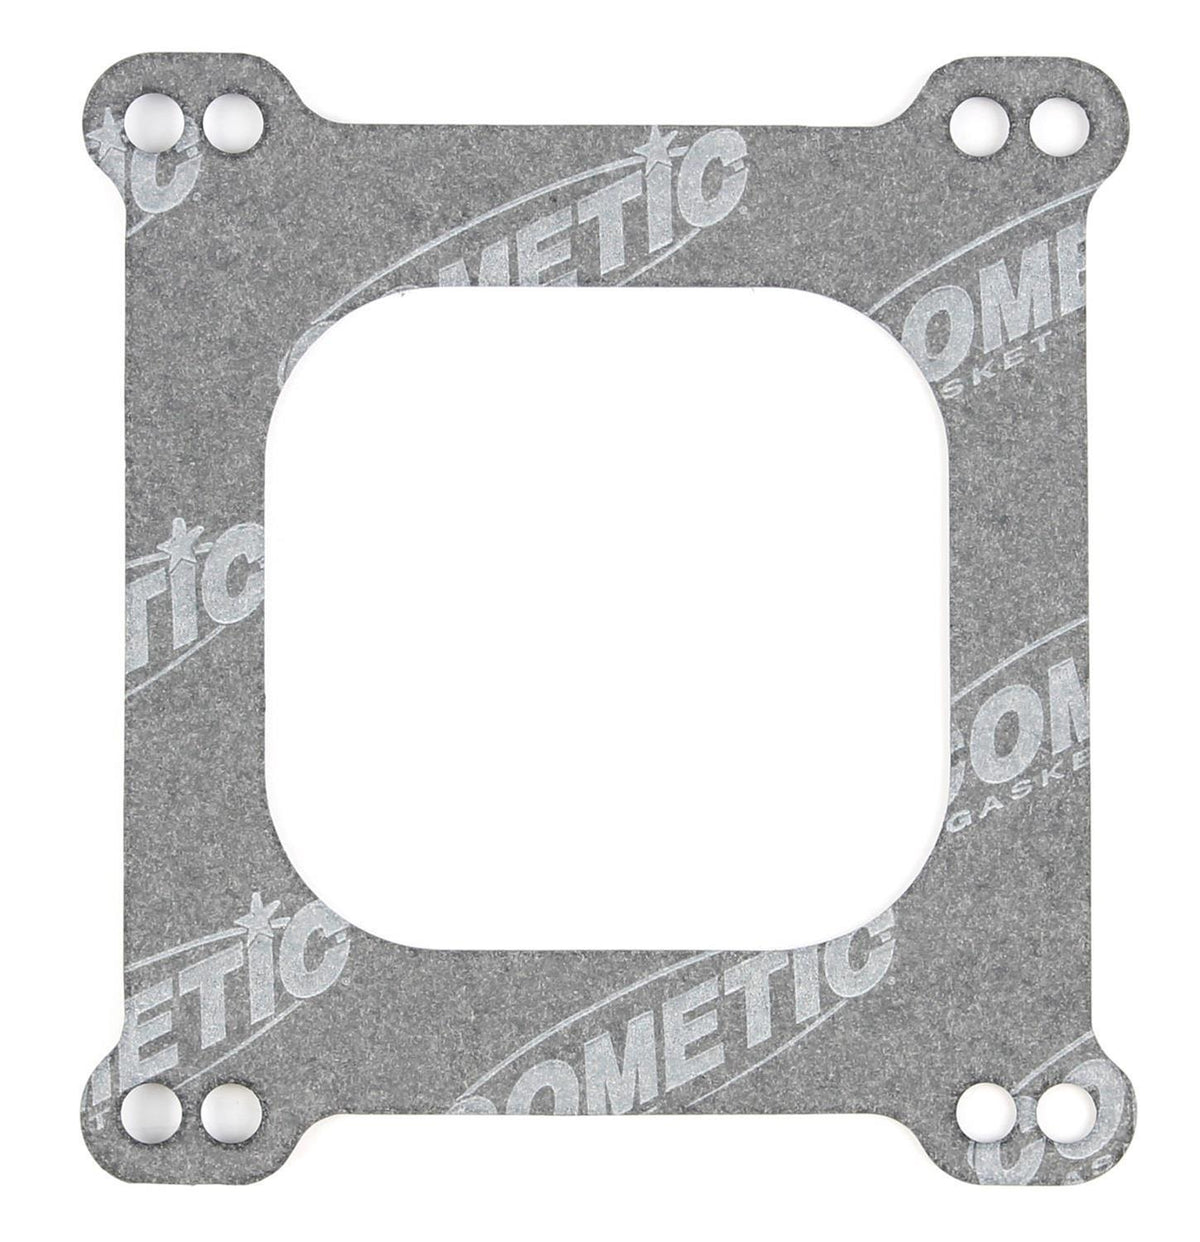 Carb Gasket - Holley 4150 Open Plenum